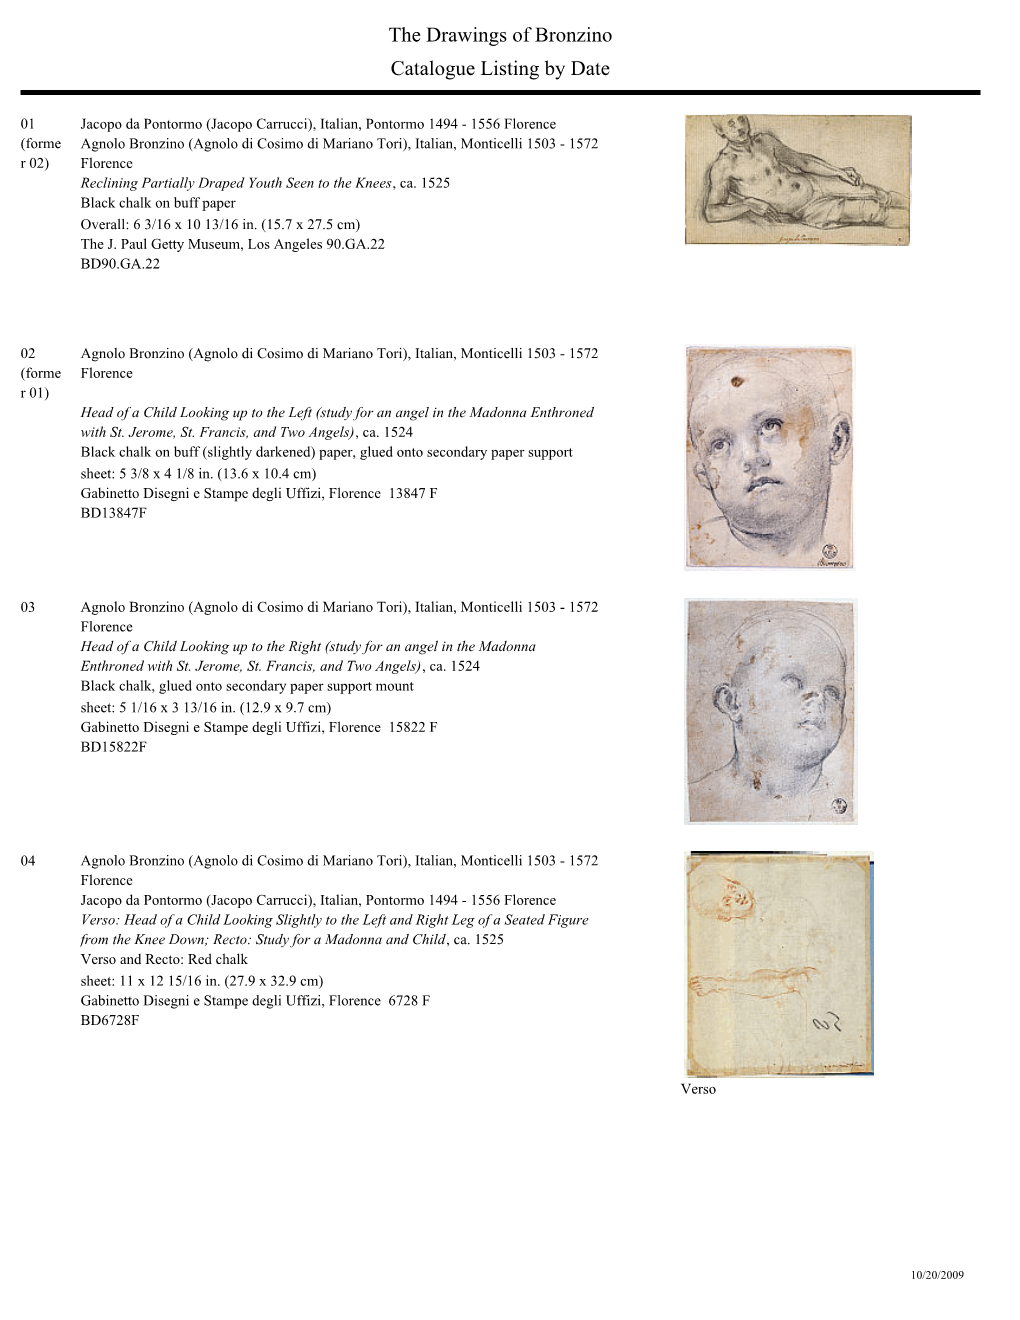 Catalogue Listing by Date the Drawings of Bronzino